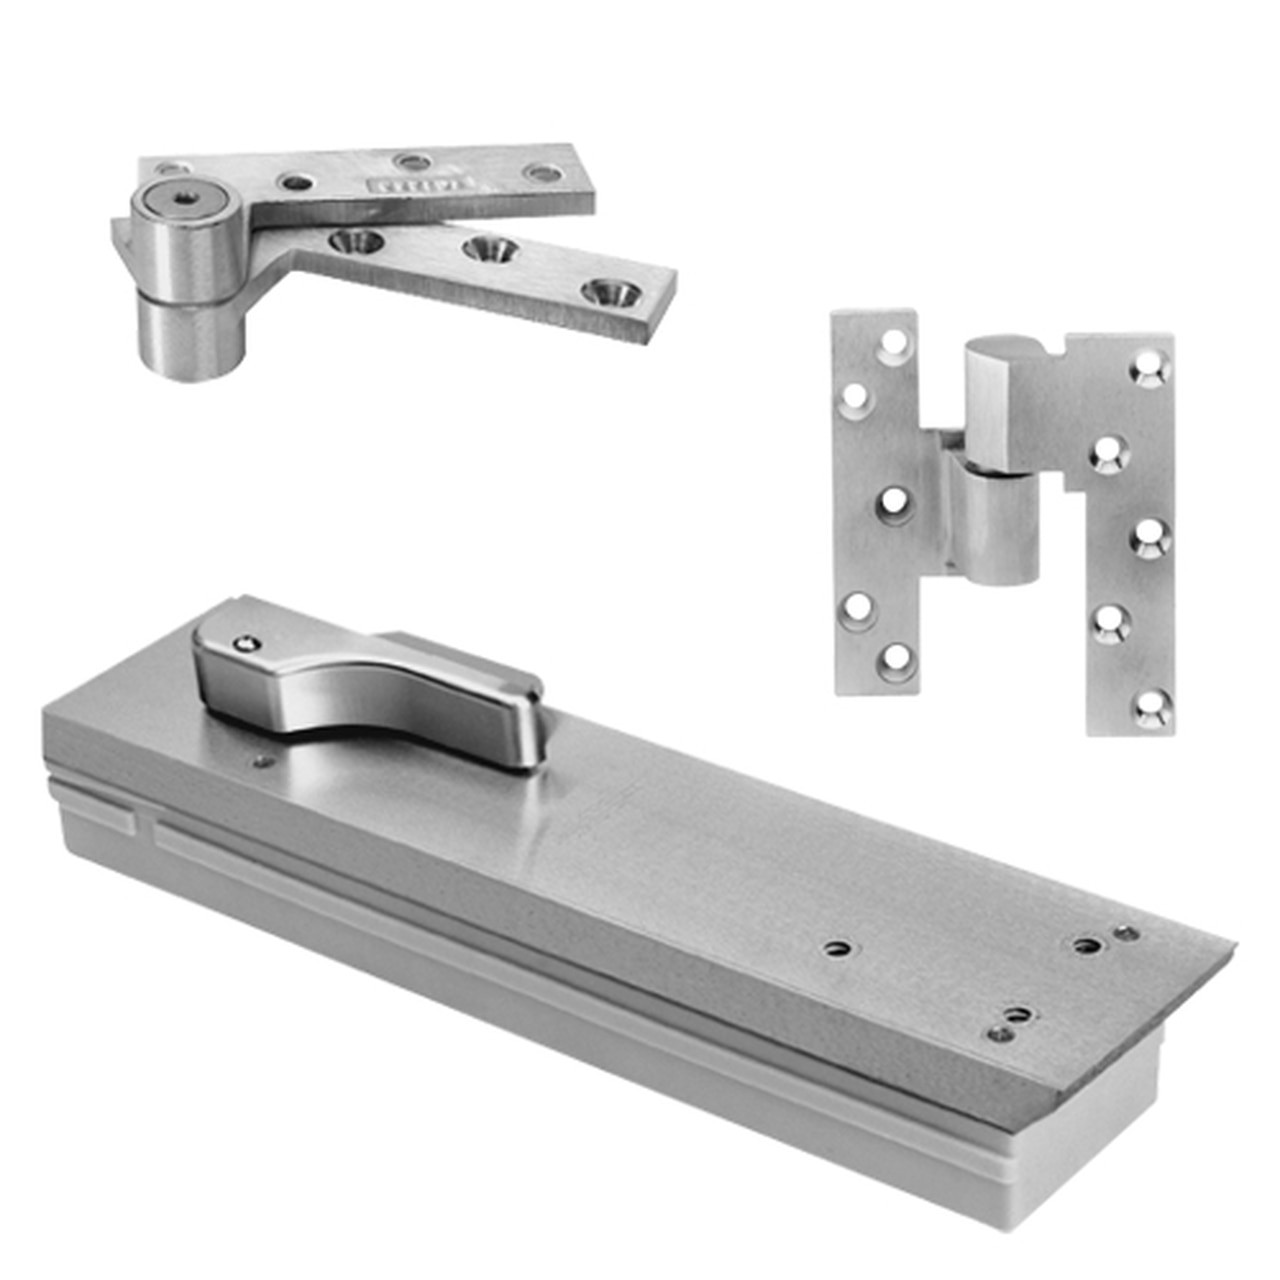 FQ5104NBC-LCC-RH-626 Rixson Q51 Series Fire Rated 3/4" Offset Hung Shallow Depth Floor Closers in Satin Chrome Finish